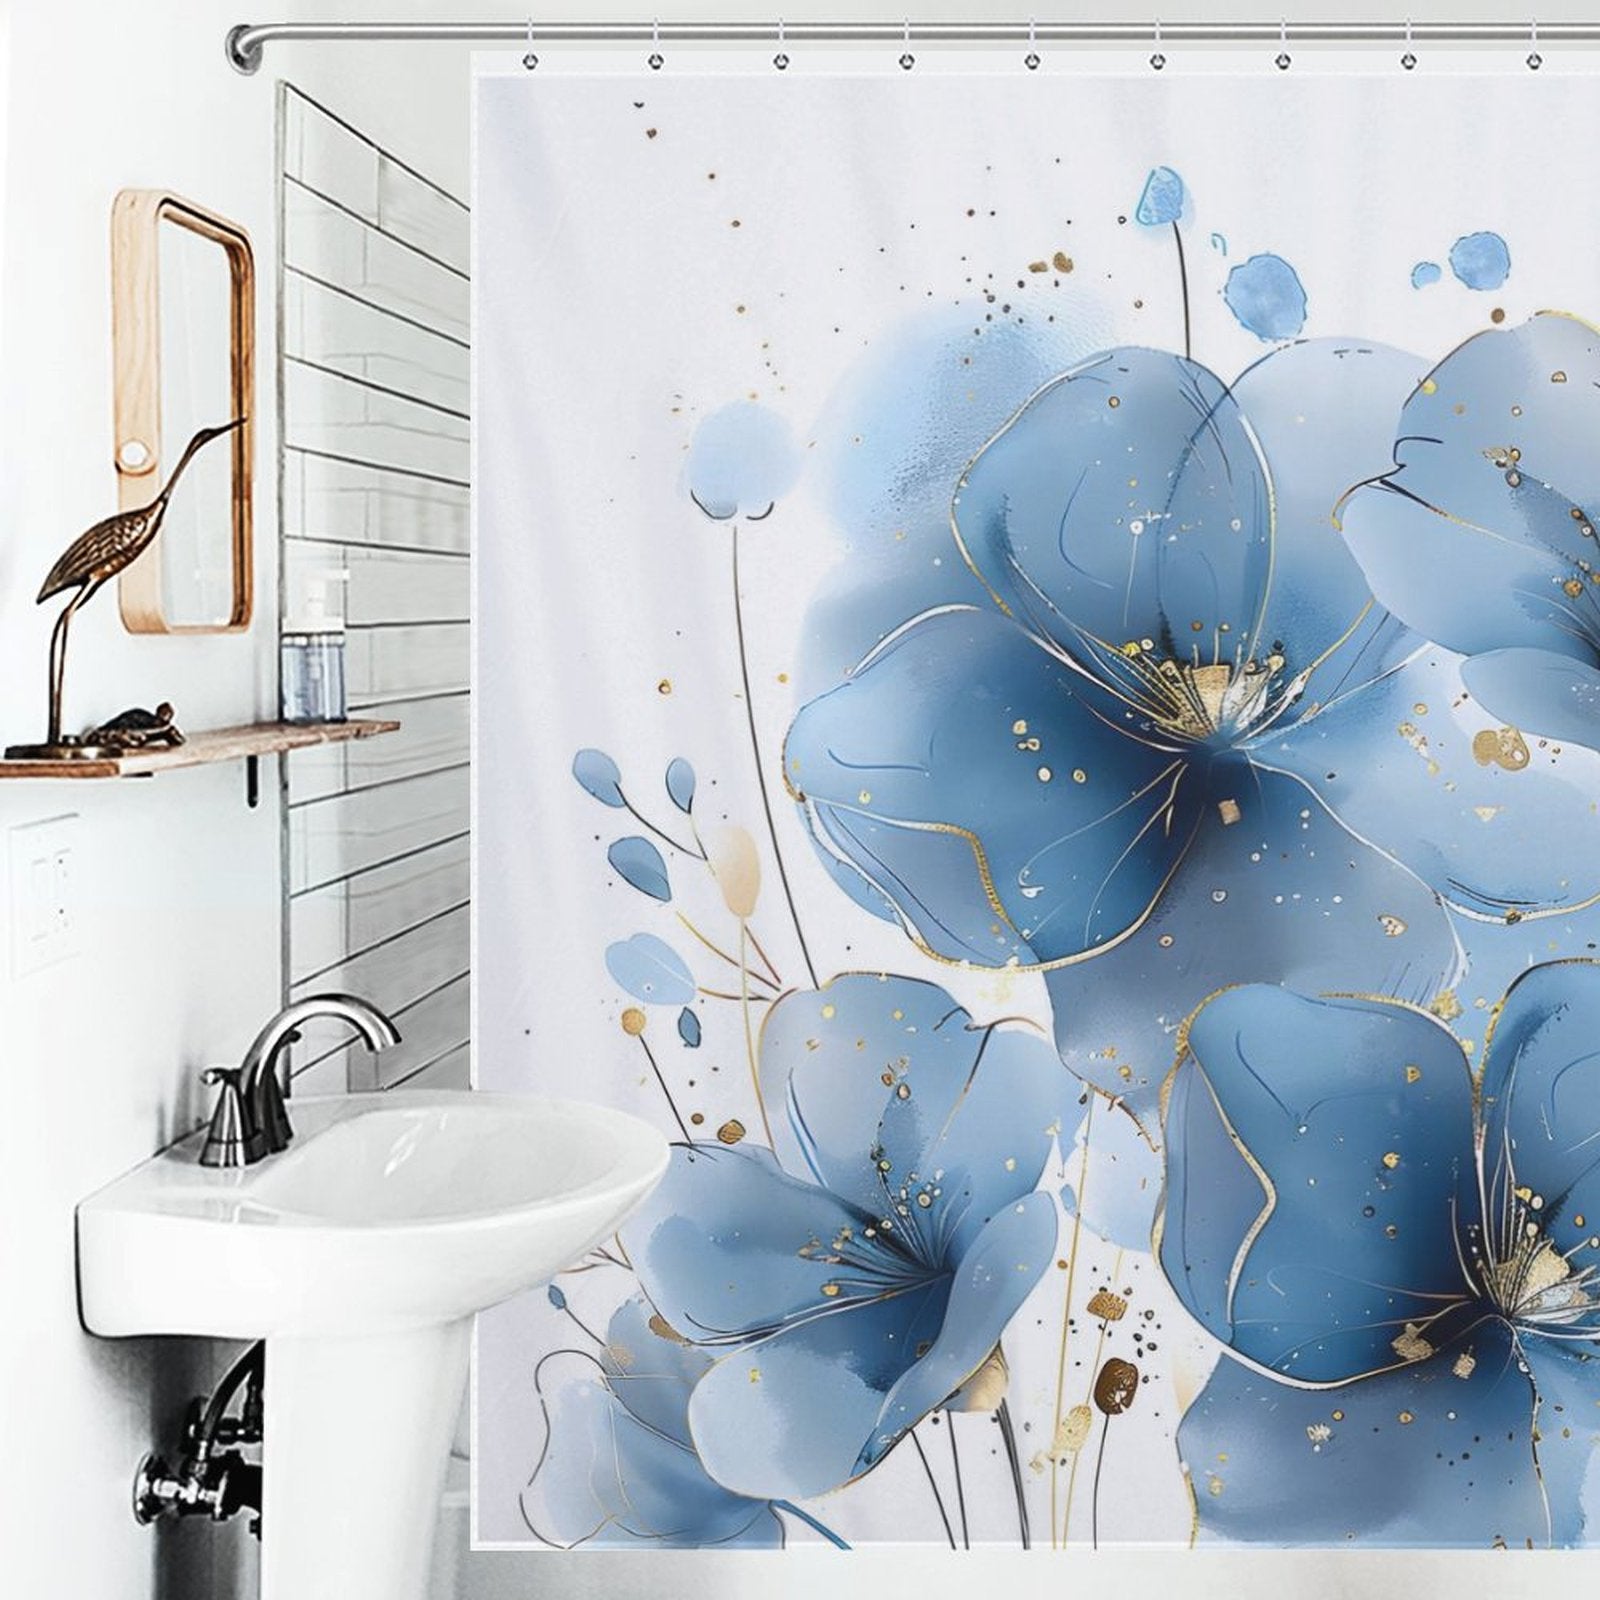 Bathroom with a white sink and mirror, featuring an Abstract Modern Art Blue Flower Minimalist Watercolor Blue Floral Shower Curtain-Cottoncat by Cotton Cat decorated with large blue flowers and abstract modern art gold accents.